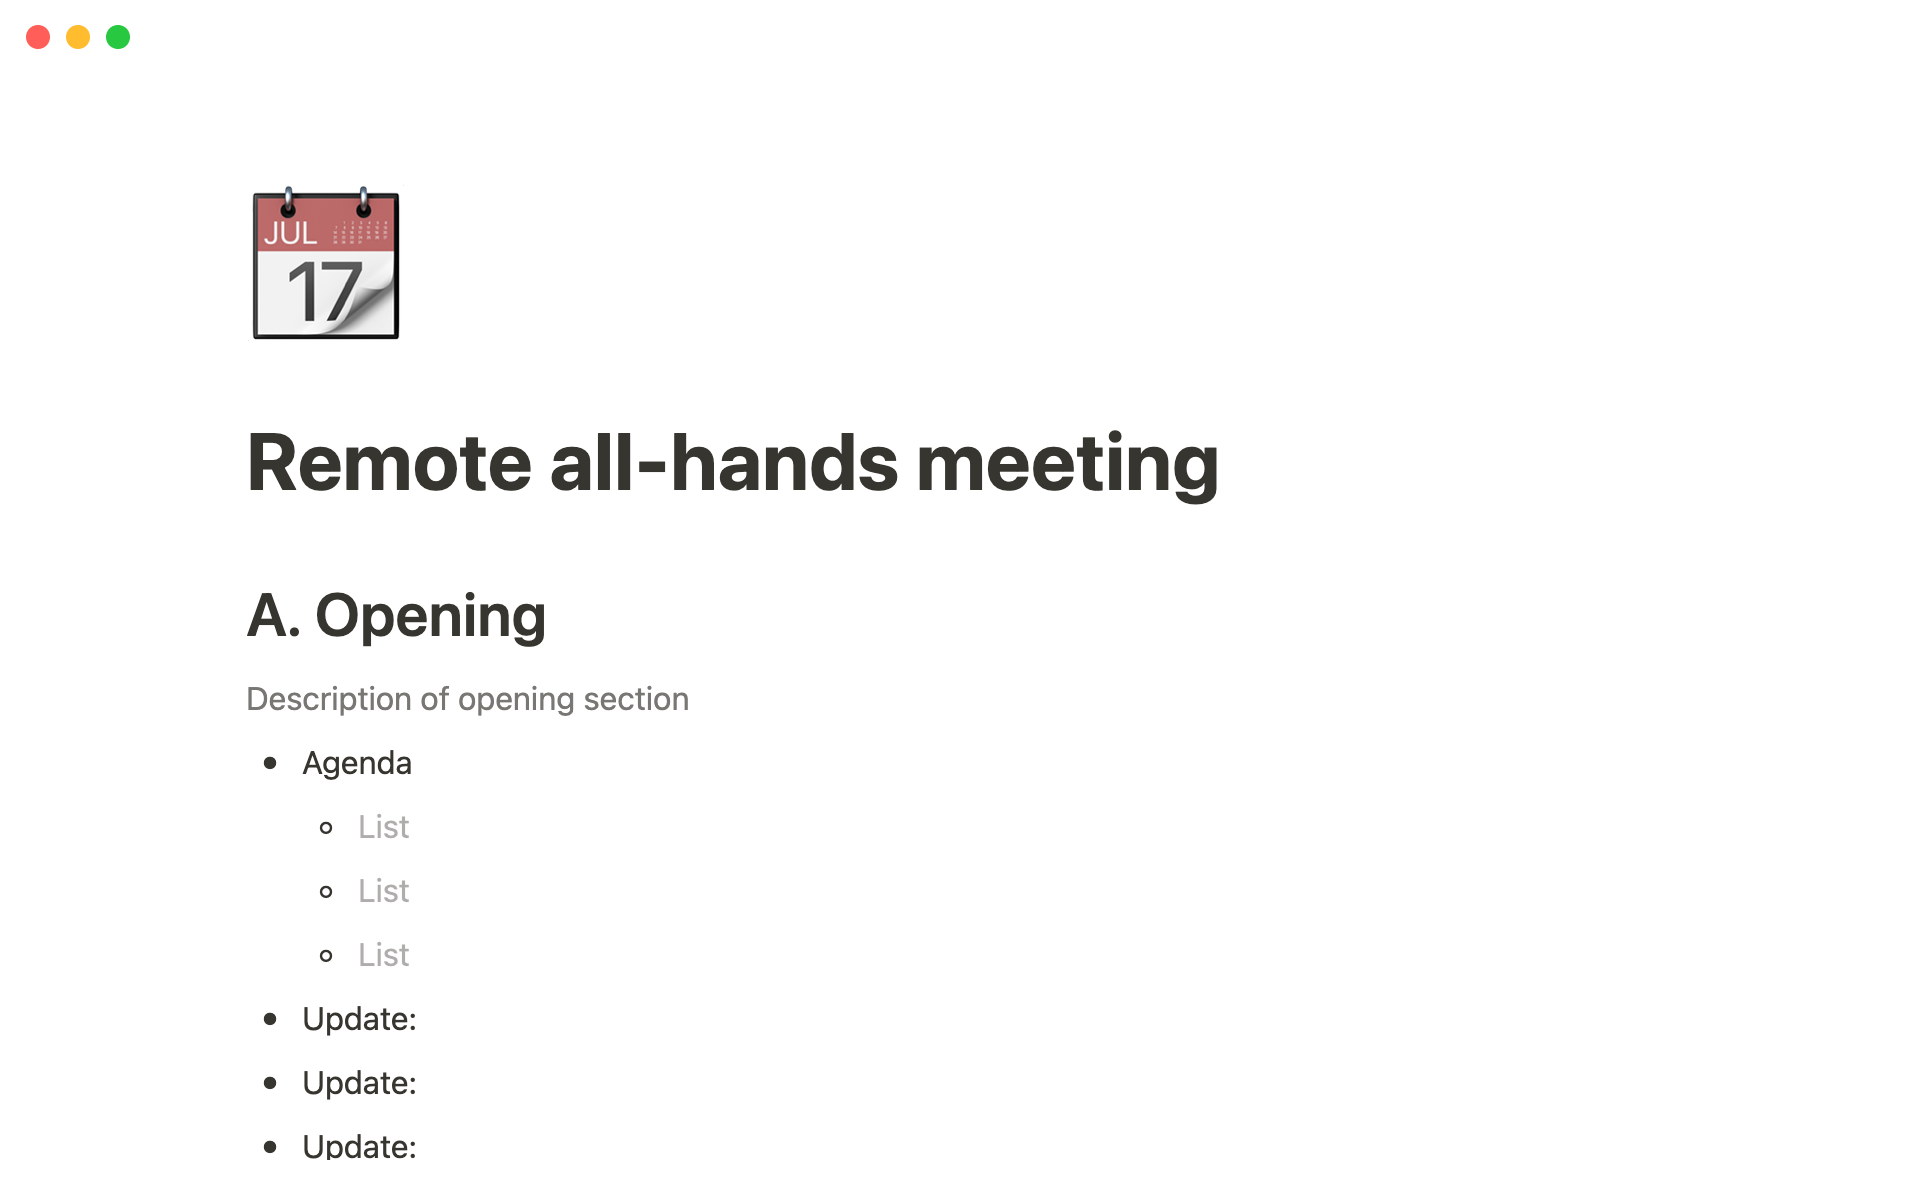 The desktop image for the Remote all-hands meeting template